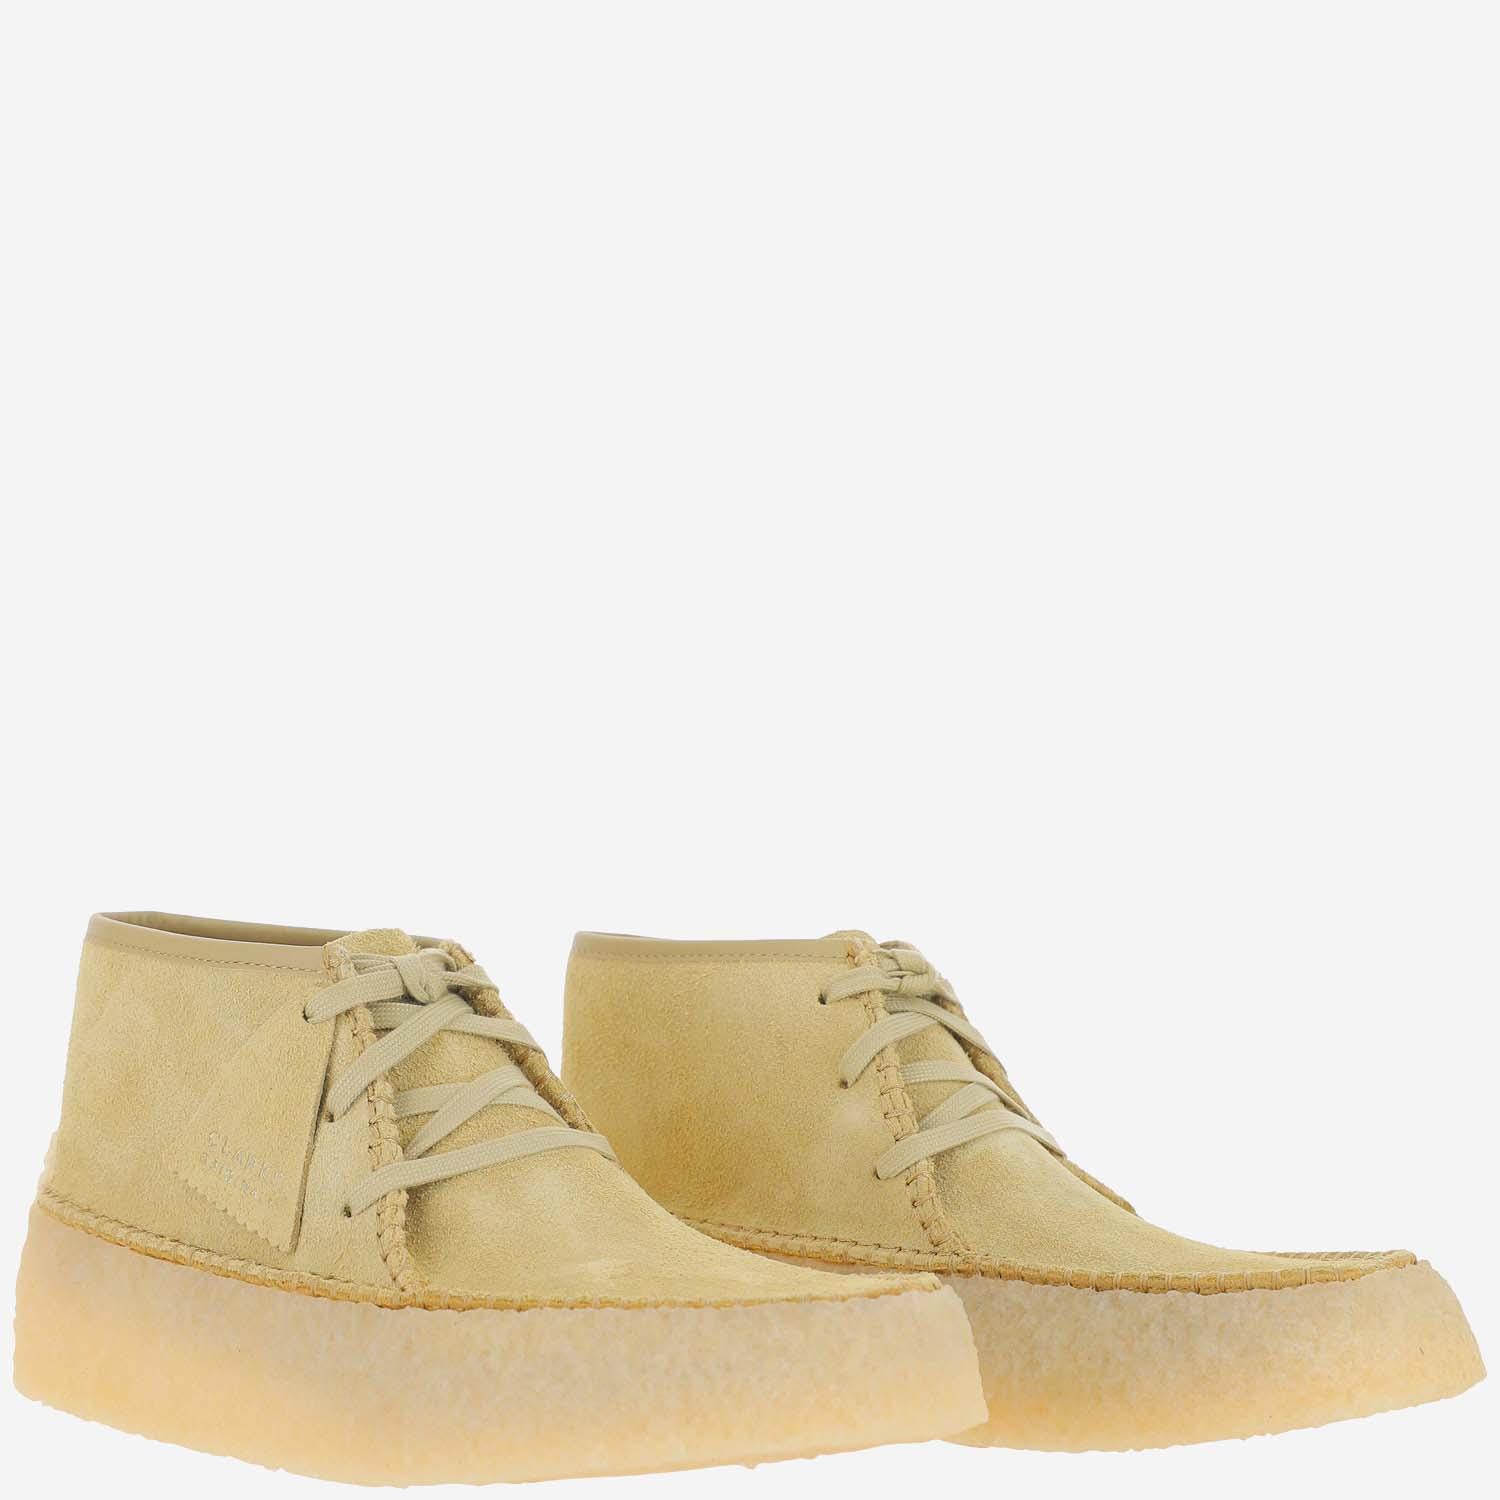 Clarks Boots in Natural for Men - Save 11% | Lyst